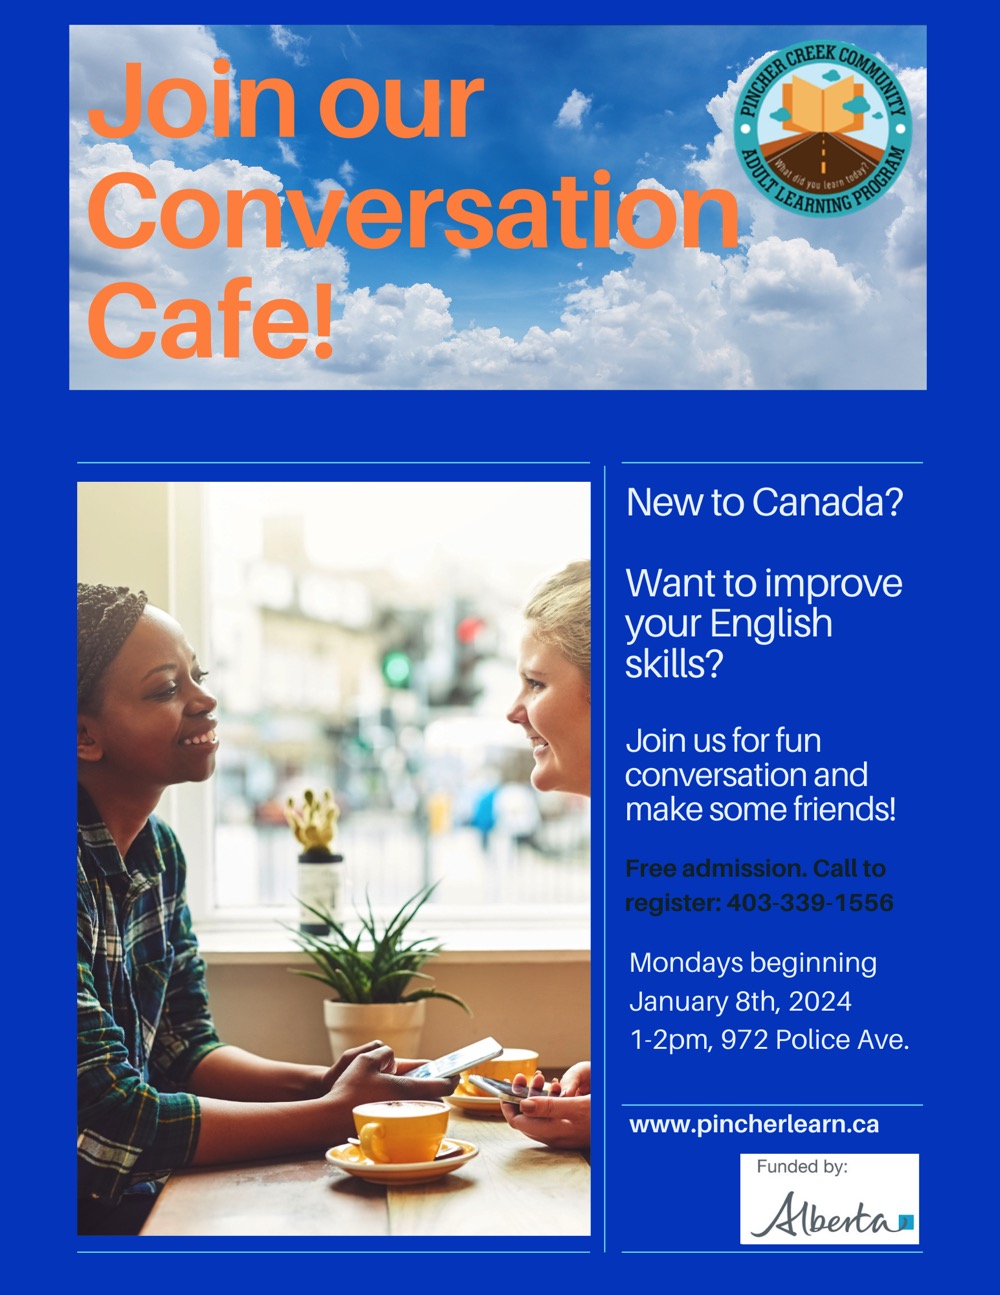 Join our Conversation Cafe 85 by 11